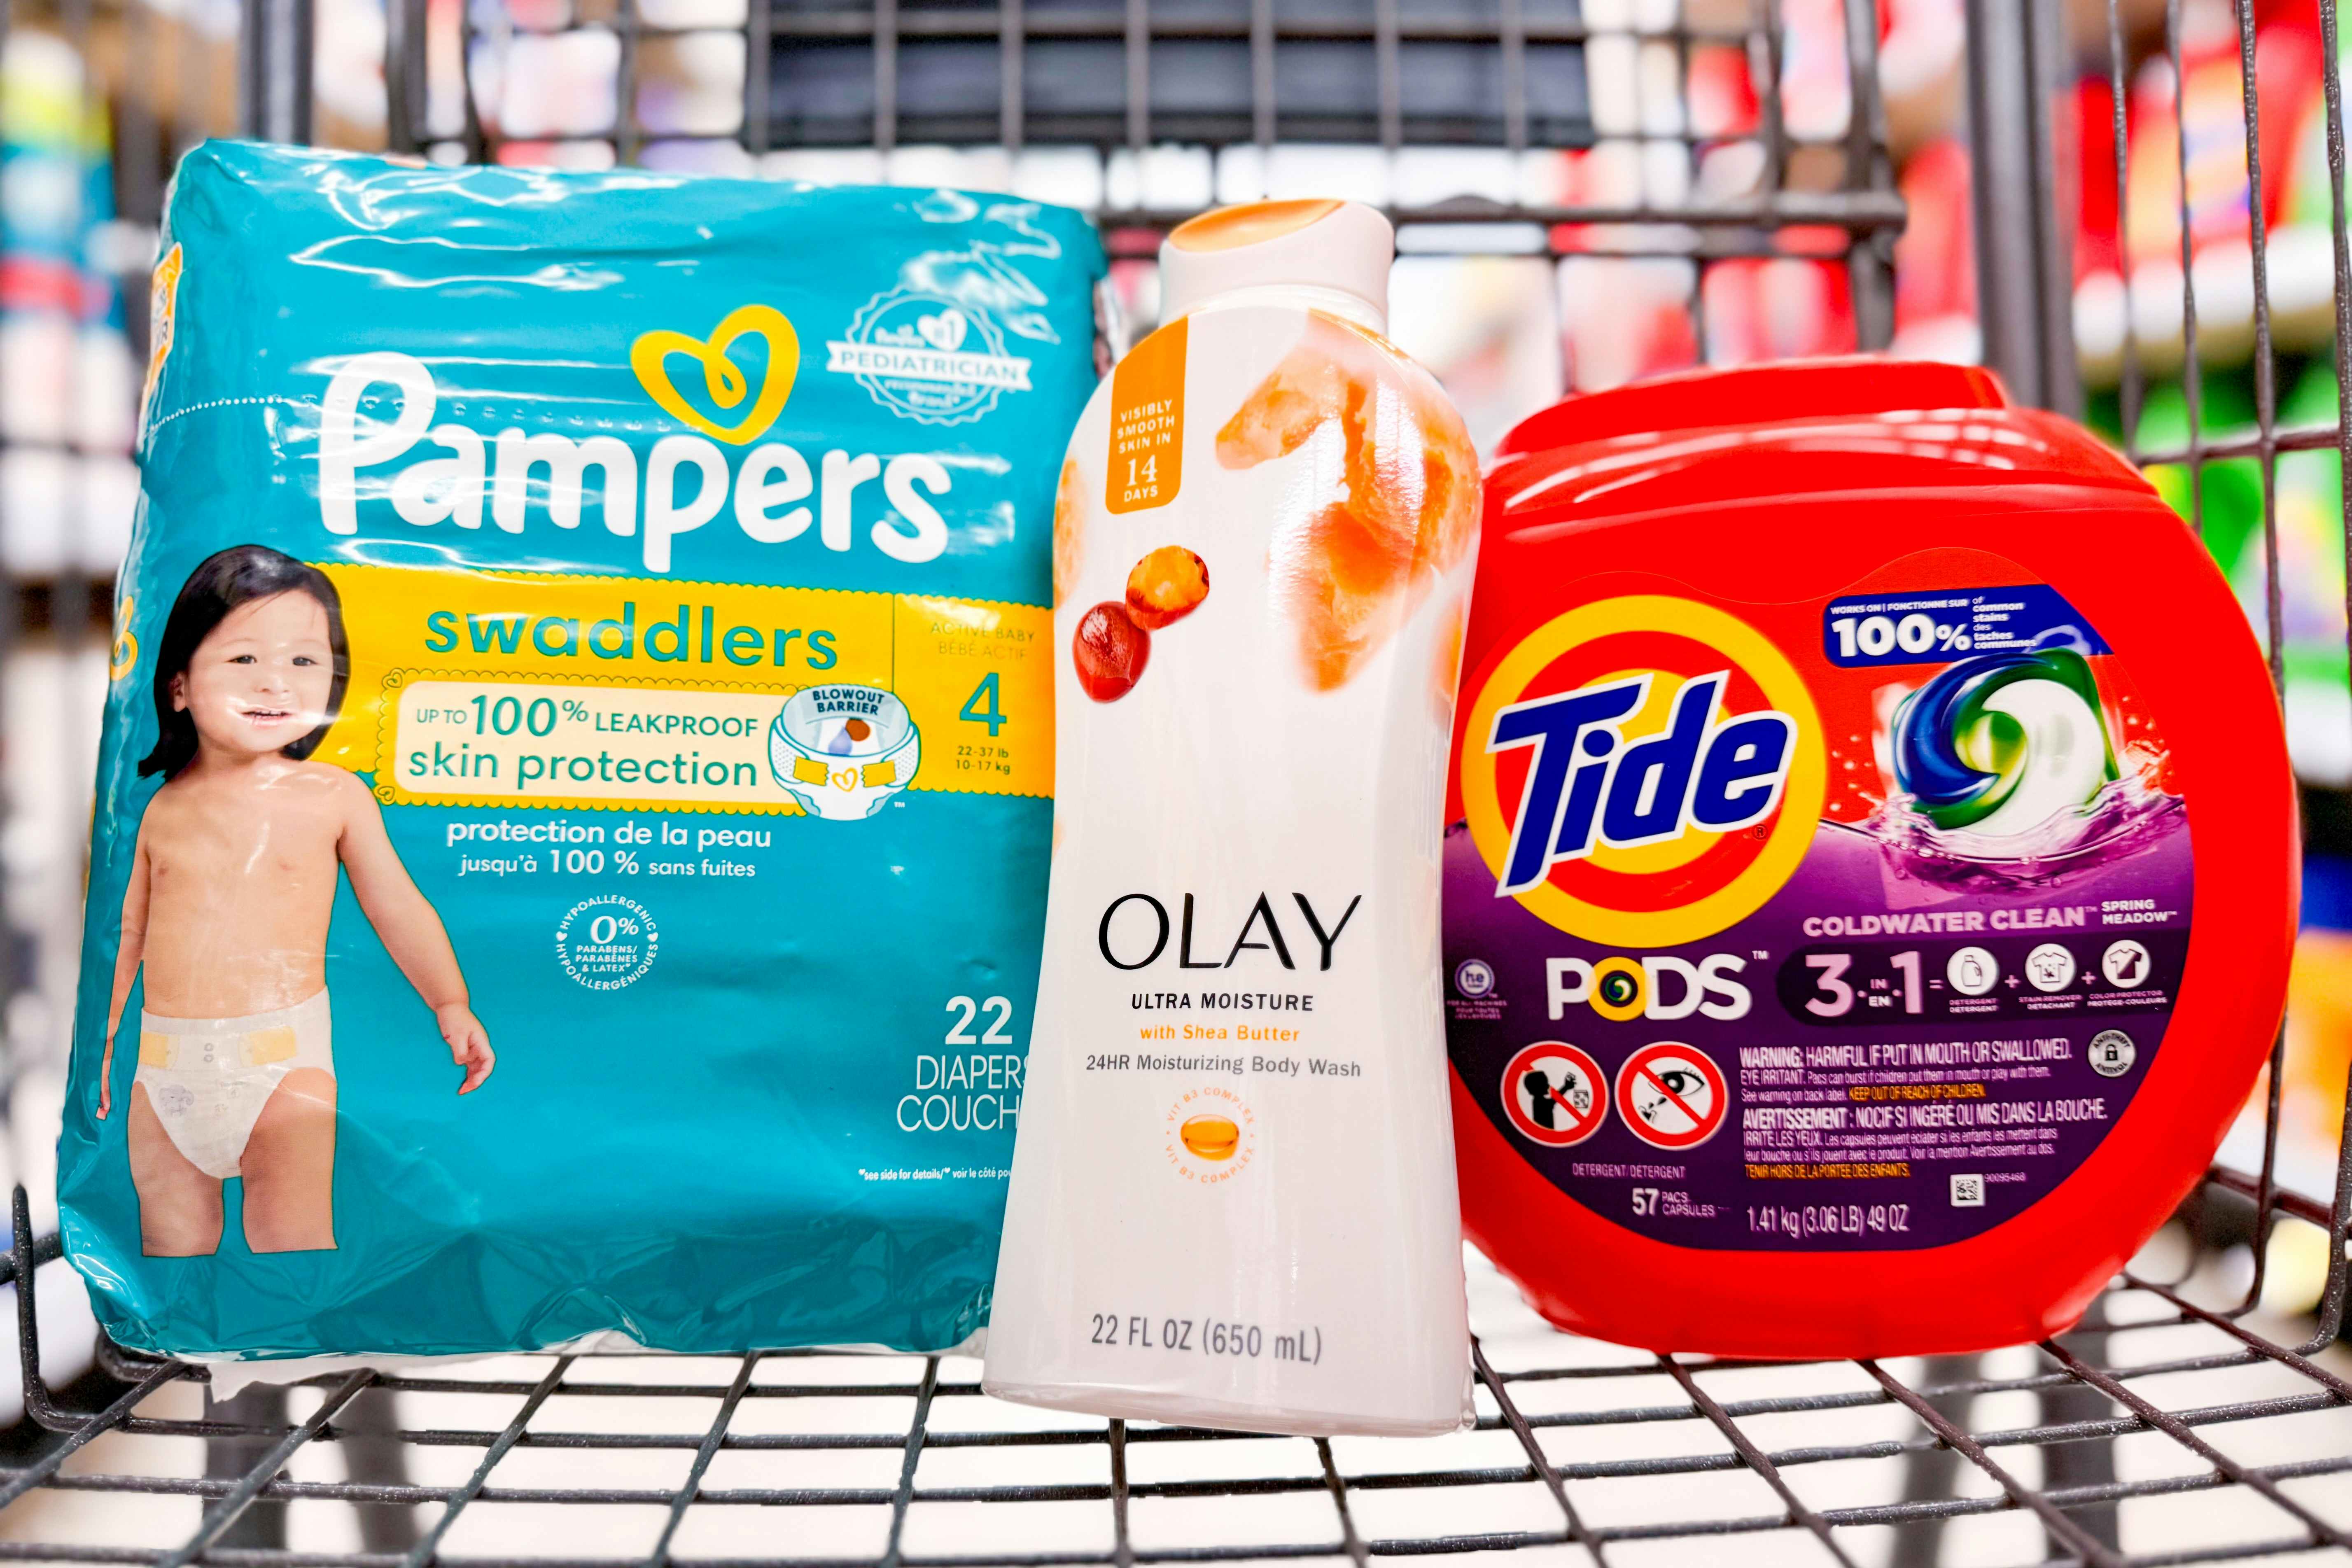 New P&G Deals at Walgreens: $4.50 Pampers, $2 Olay, $11.49 Tide Pods